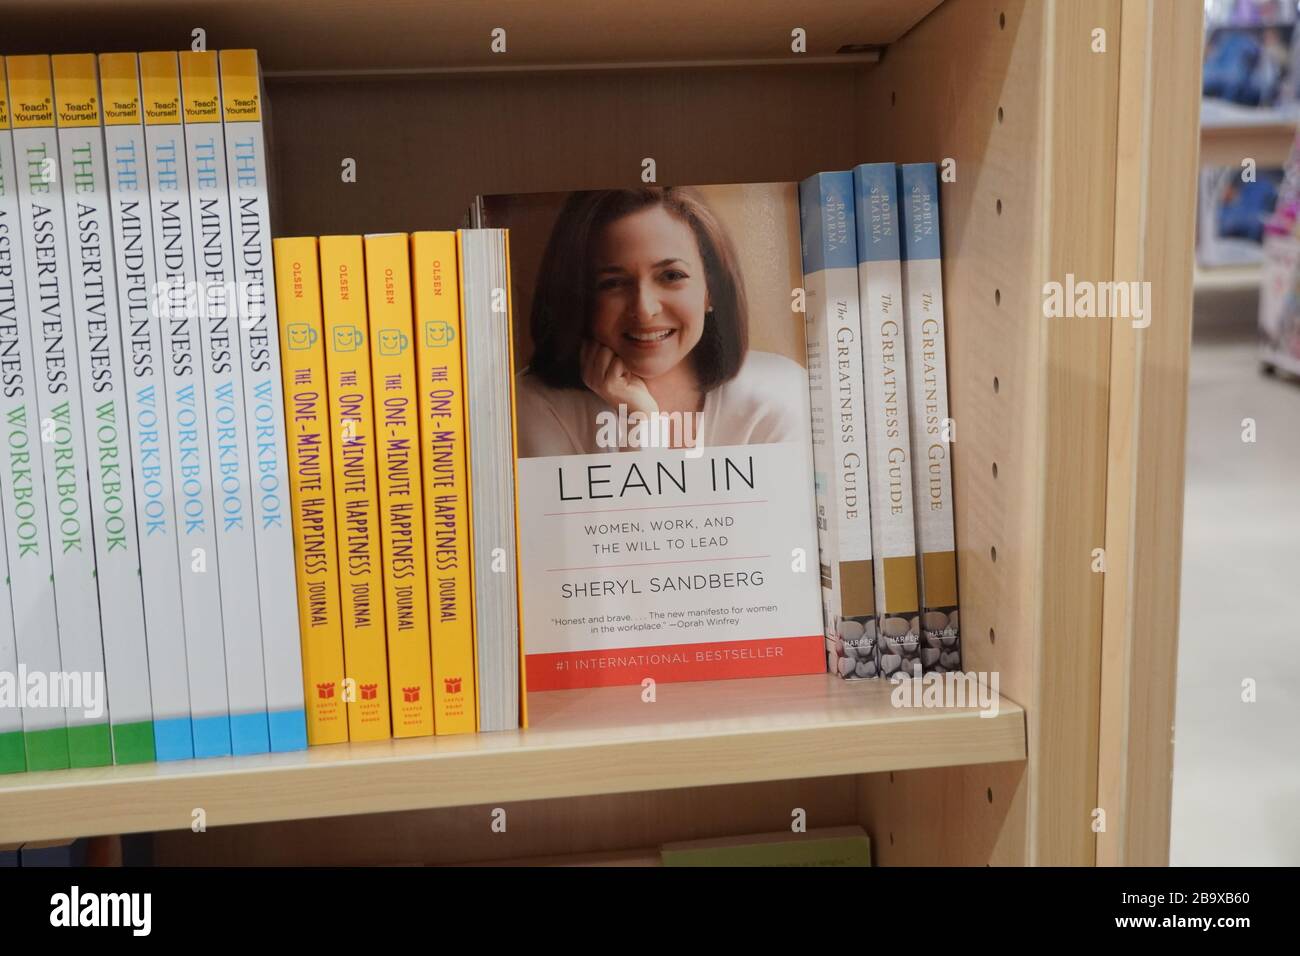 Dubai UAE December 2019 Lean in book by Sheryl Sandberg COO of Facebook displayed for sale at book store. Book showcased for sale. Stock Photo